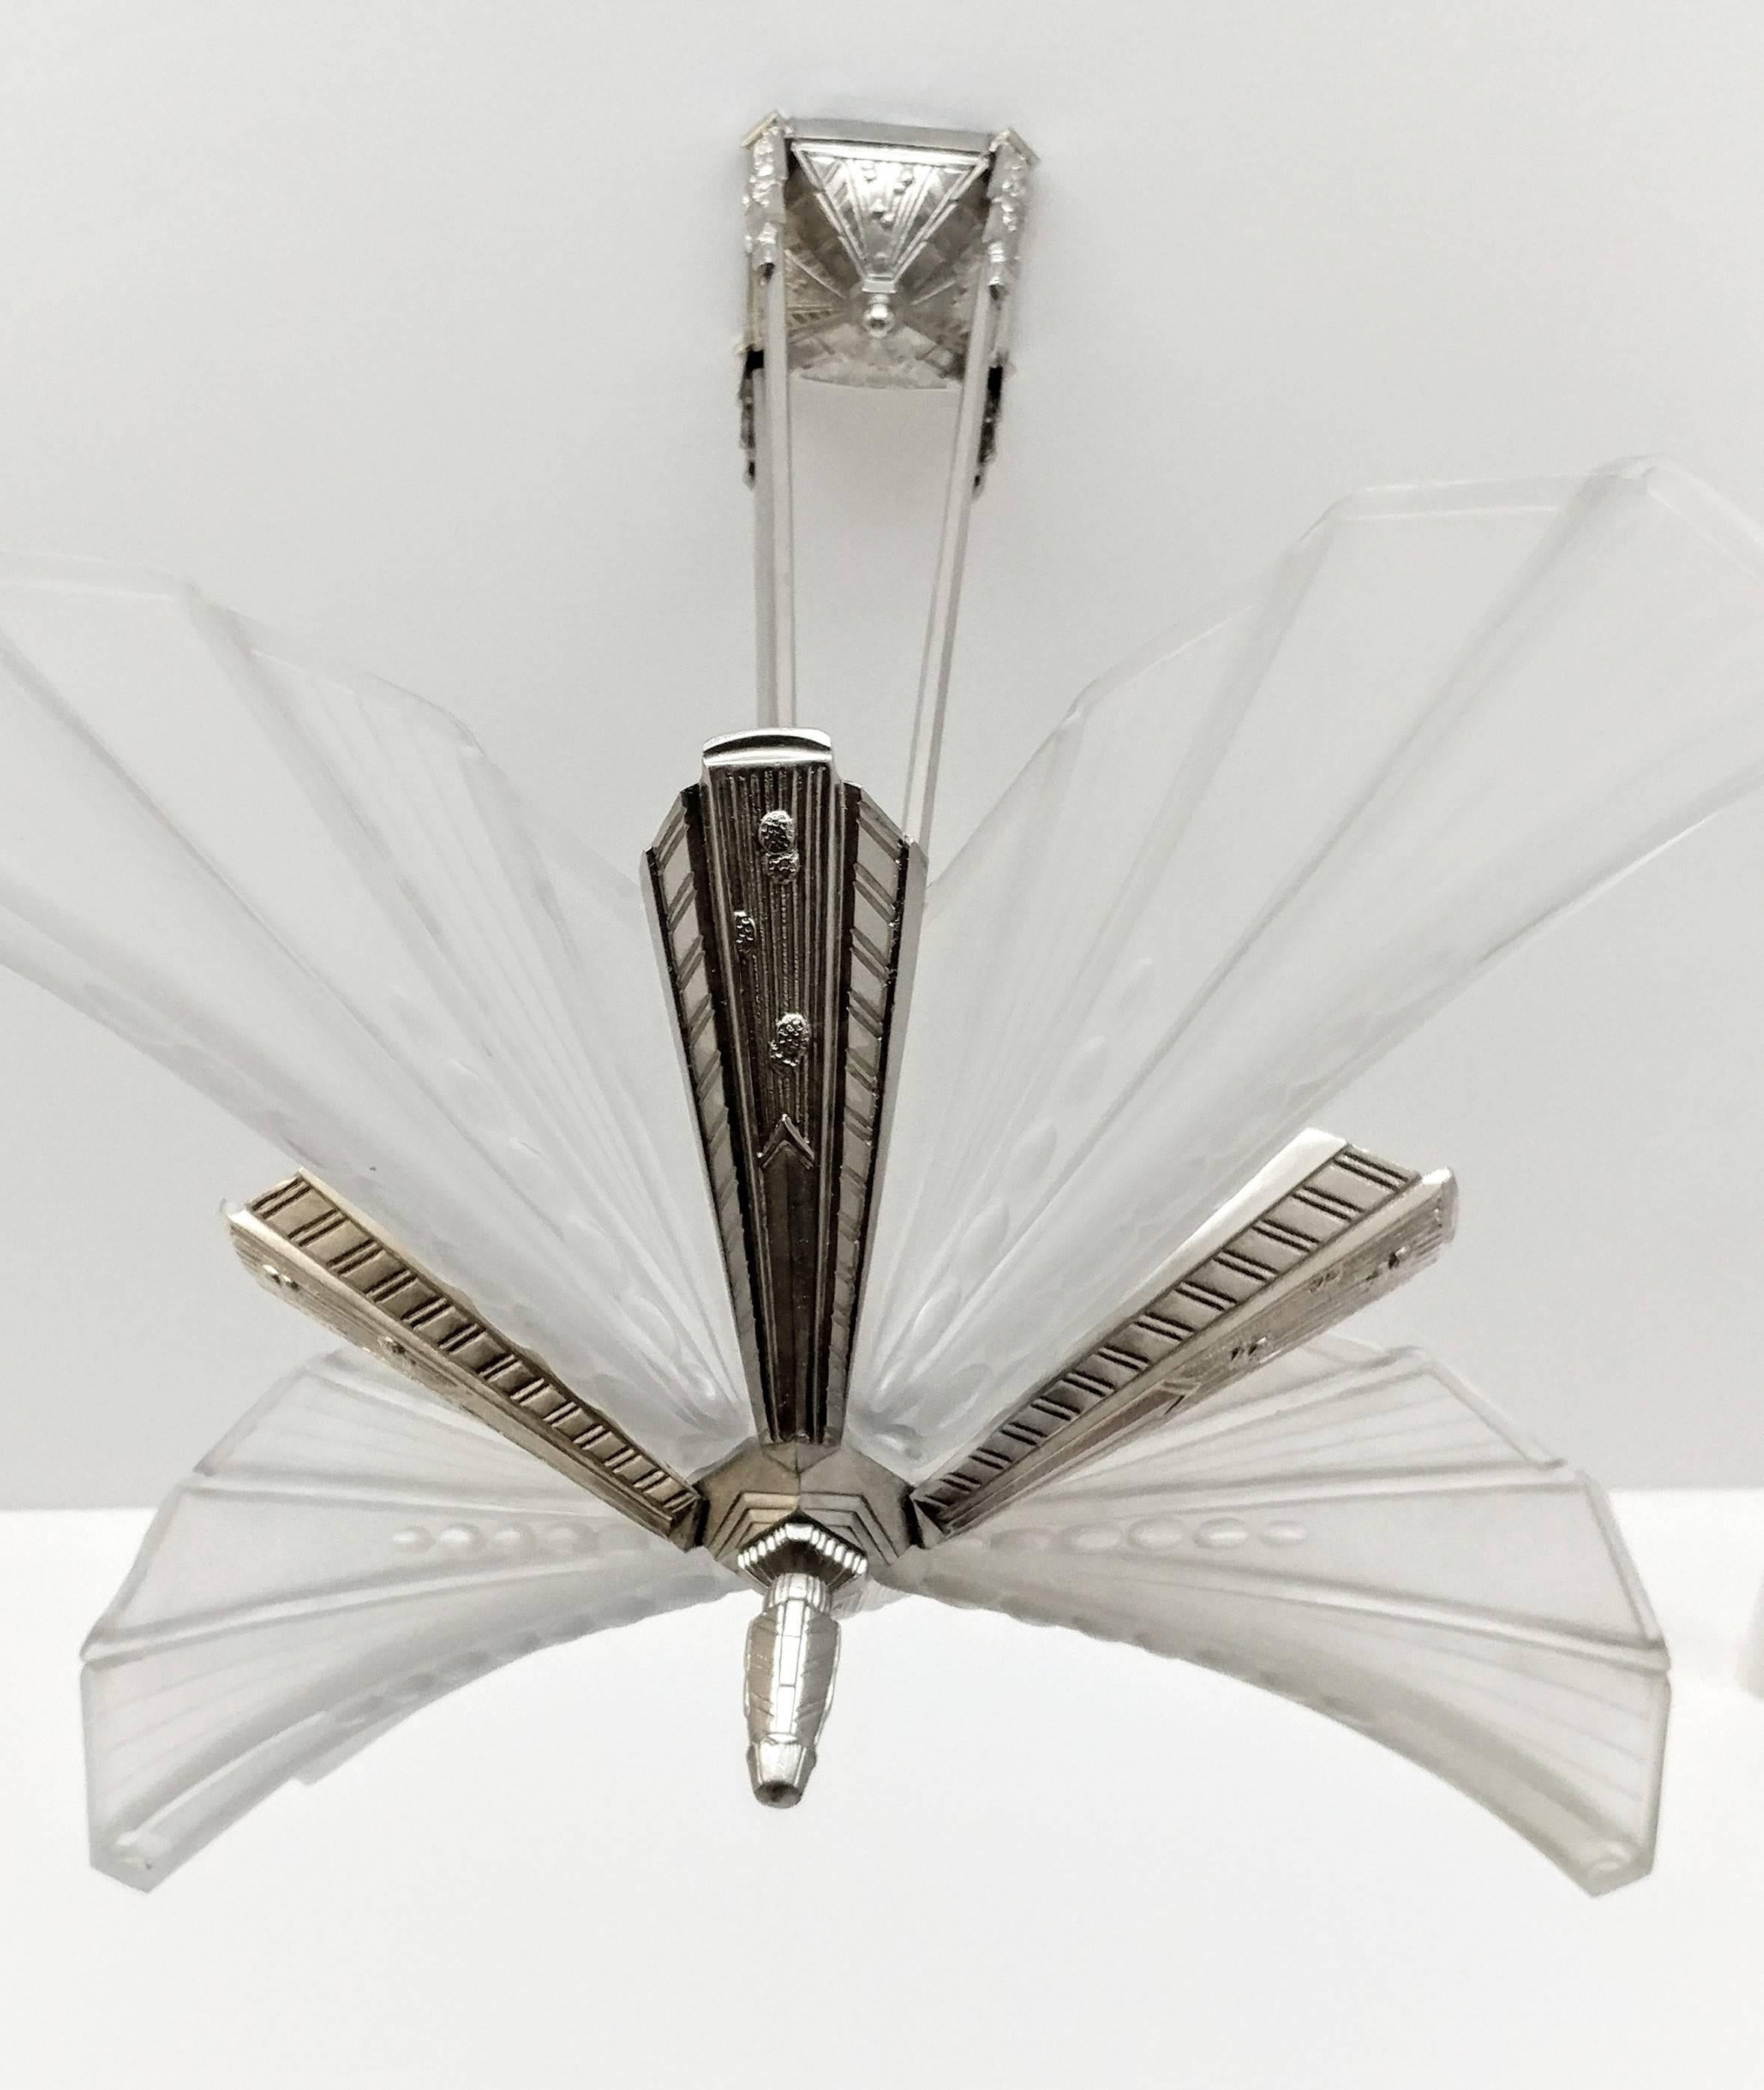 A French Art Deco chandelier by the French artist 